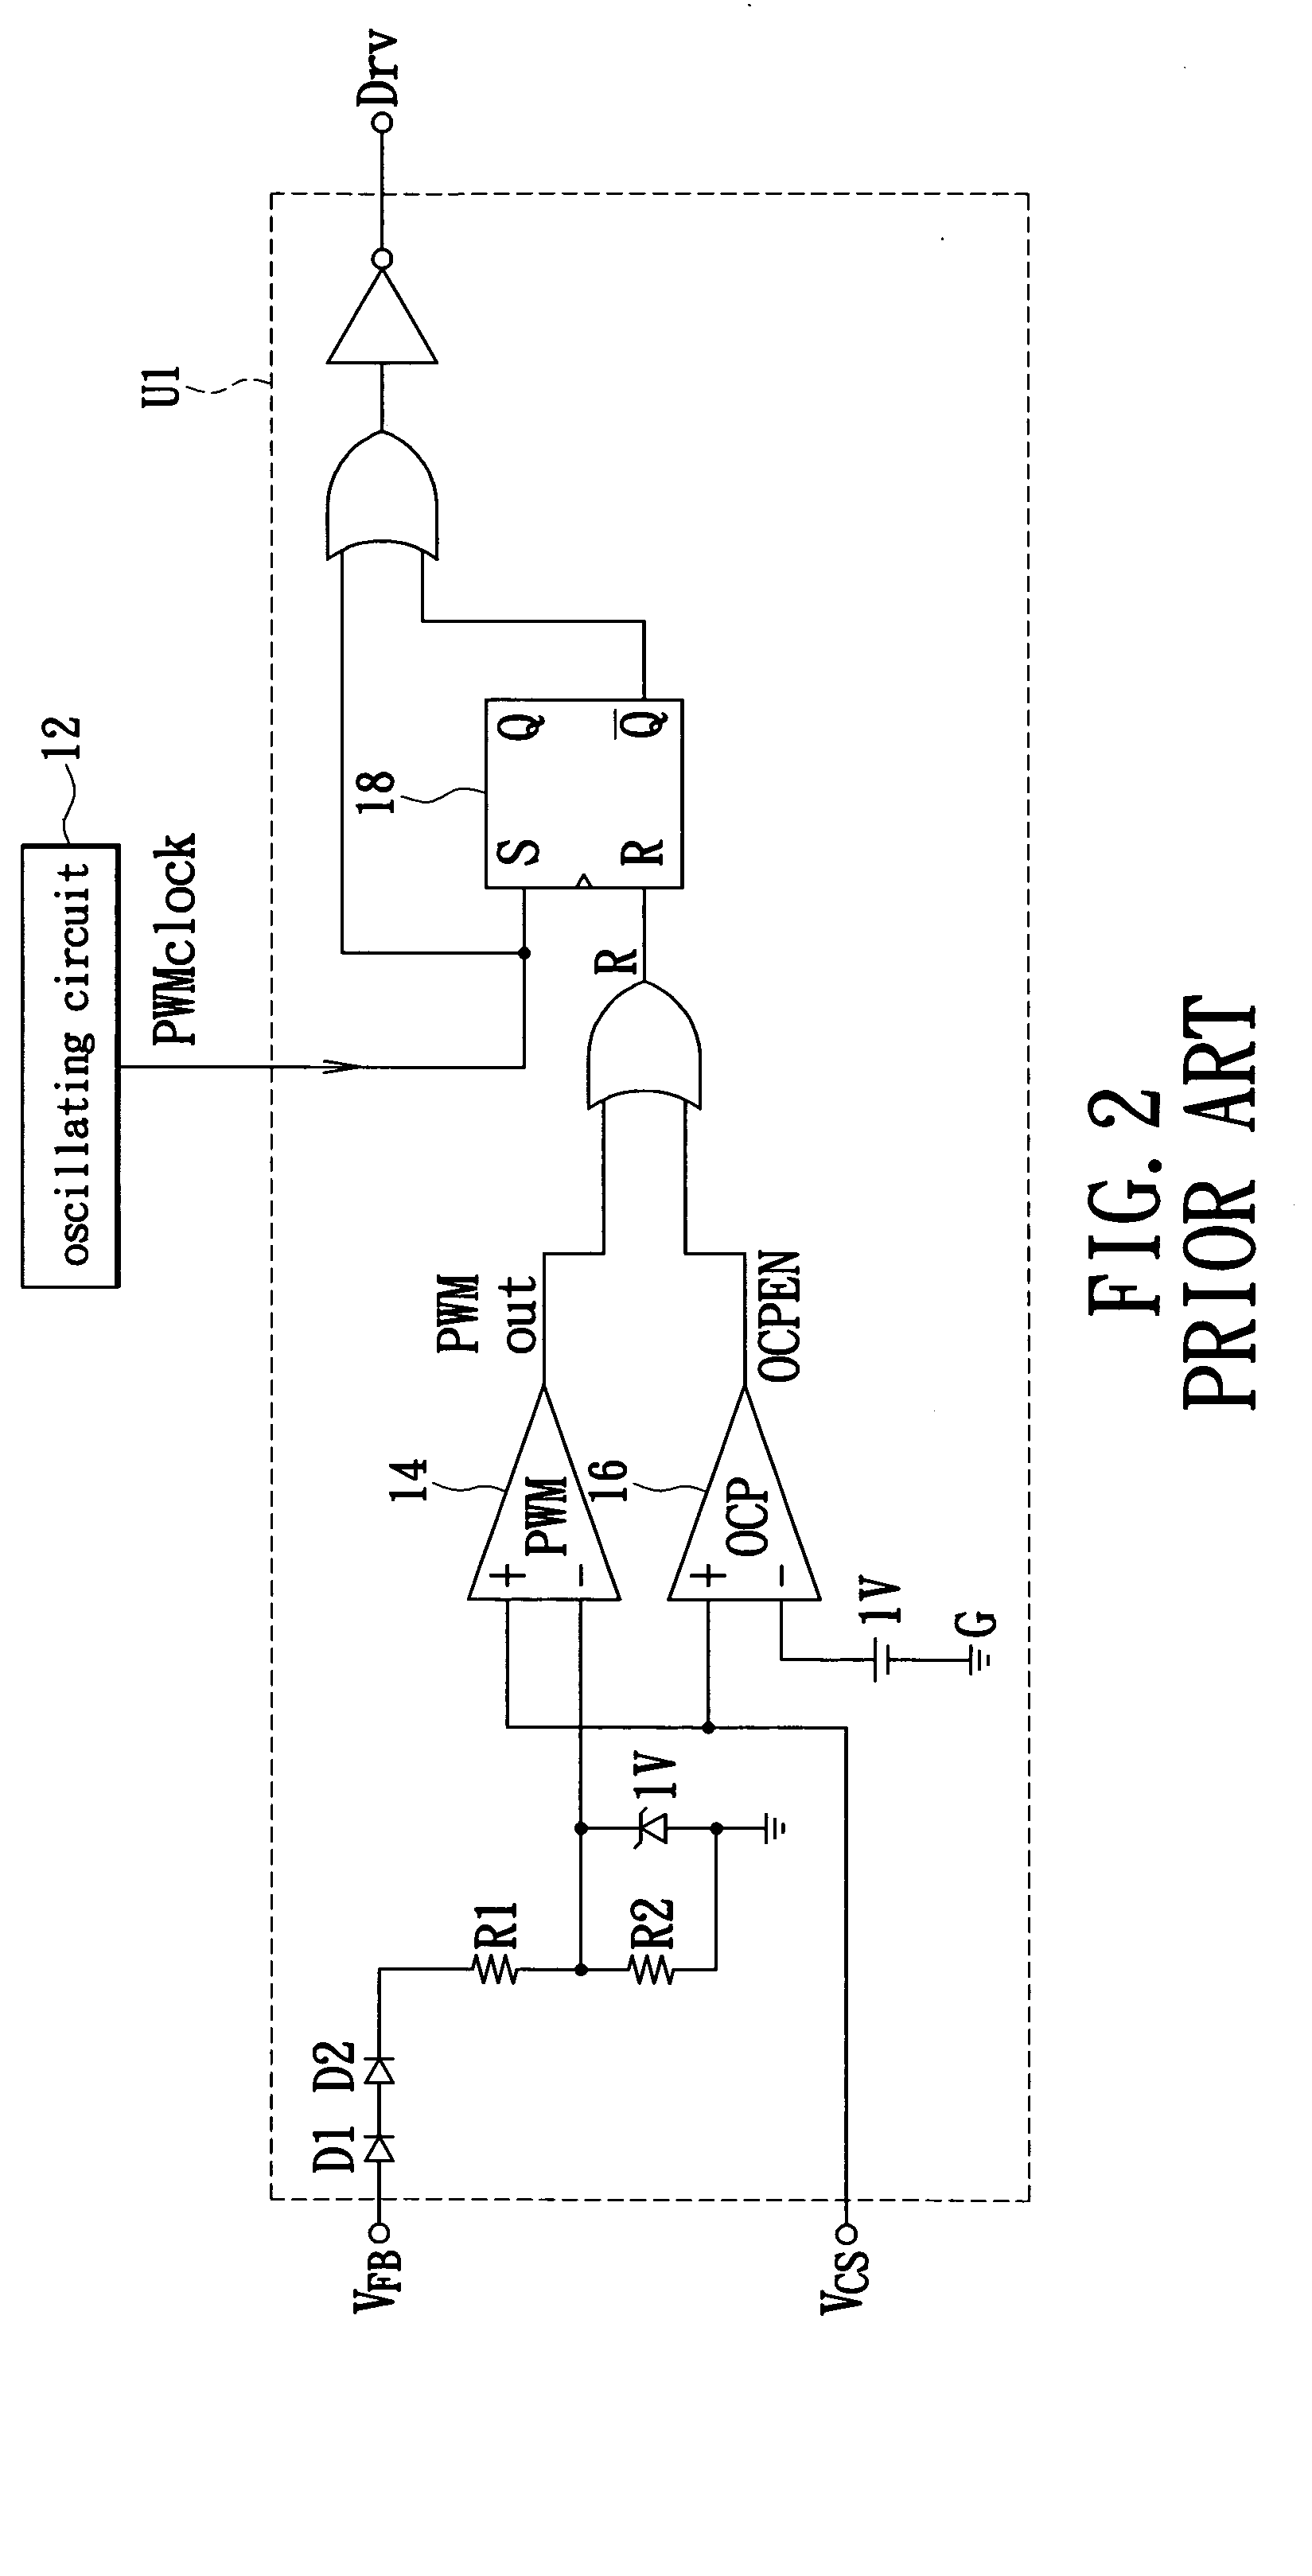 Pulse width modulation device with a power saving mode controlled by an output voltage feedback hysteresis circuit